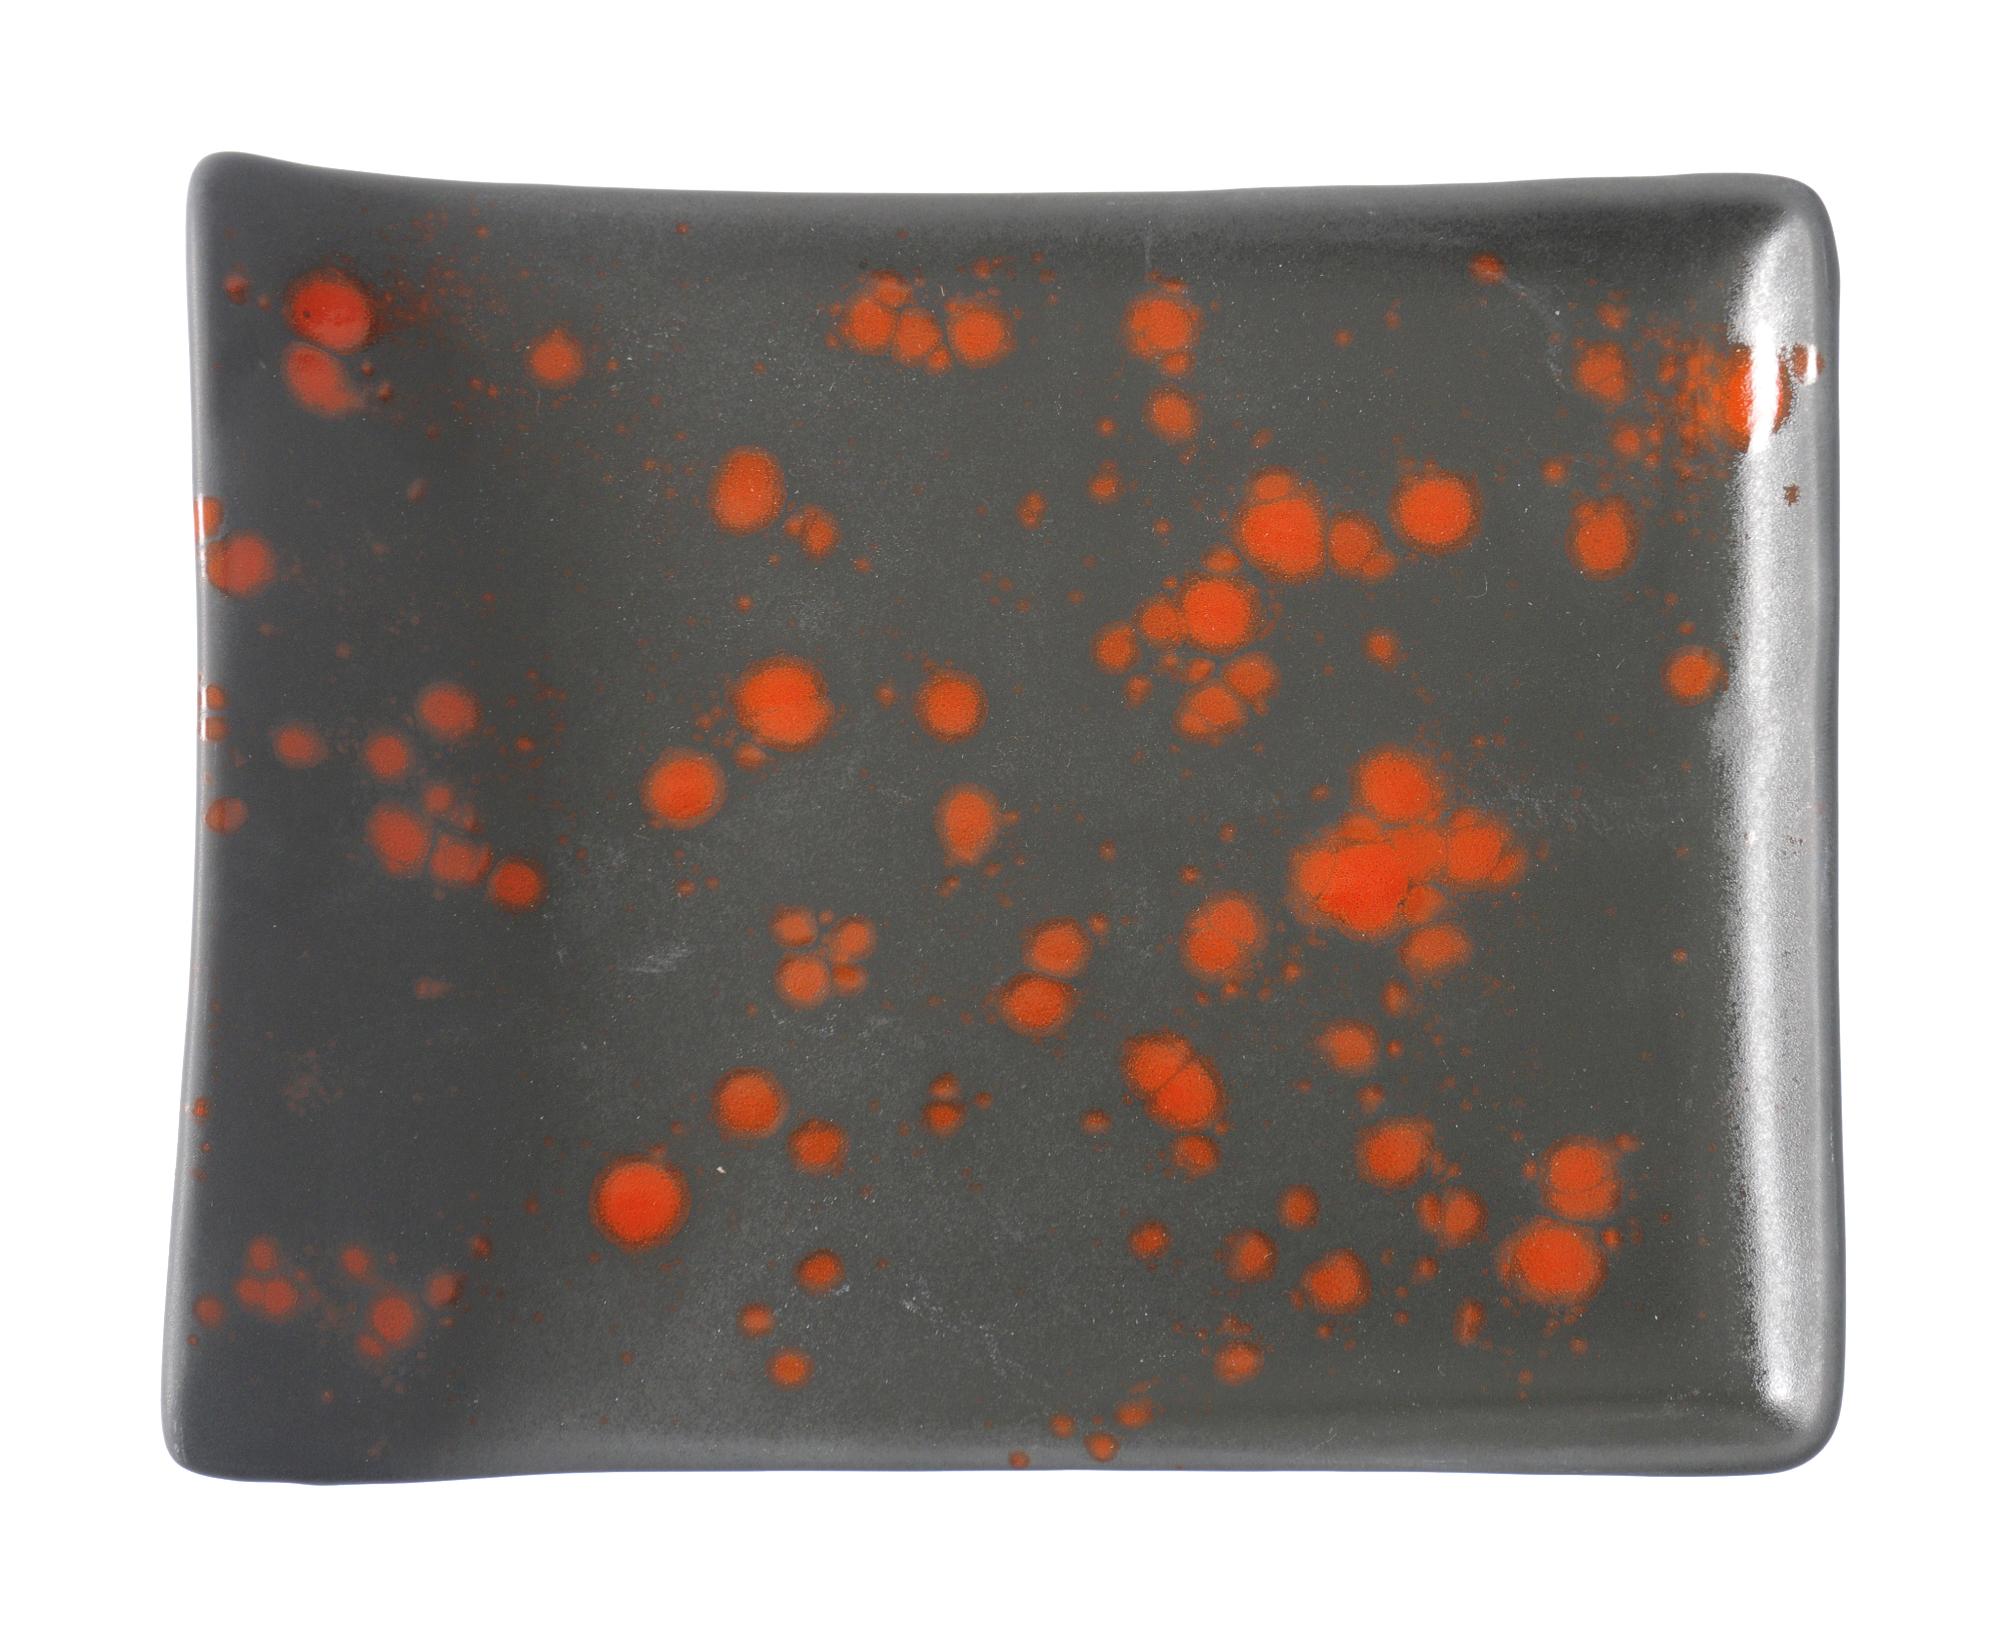 Bloom serving plate, 215x120mm